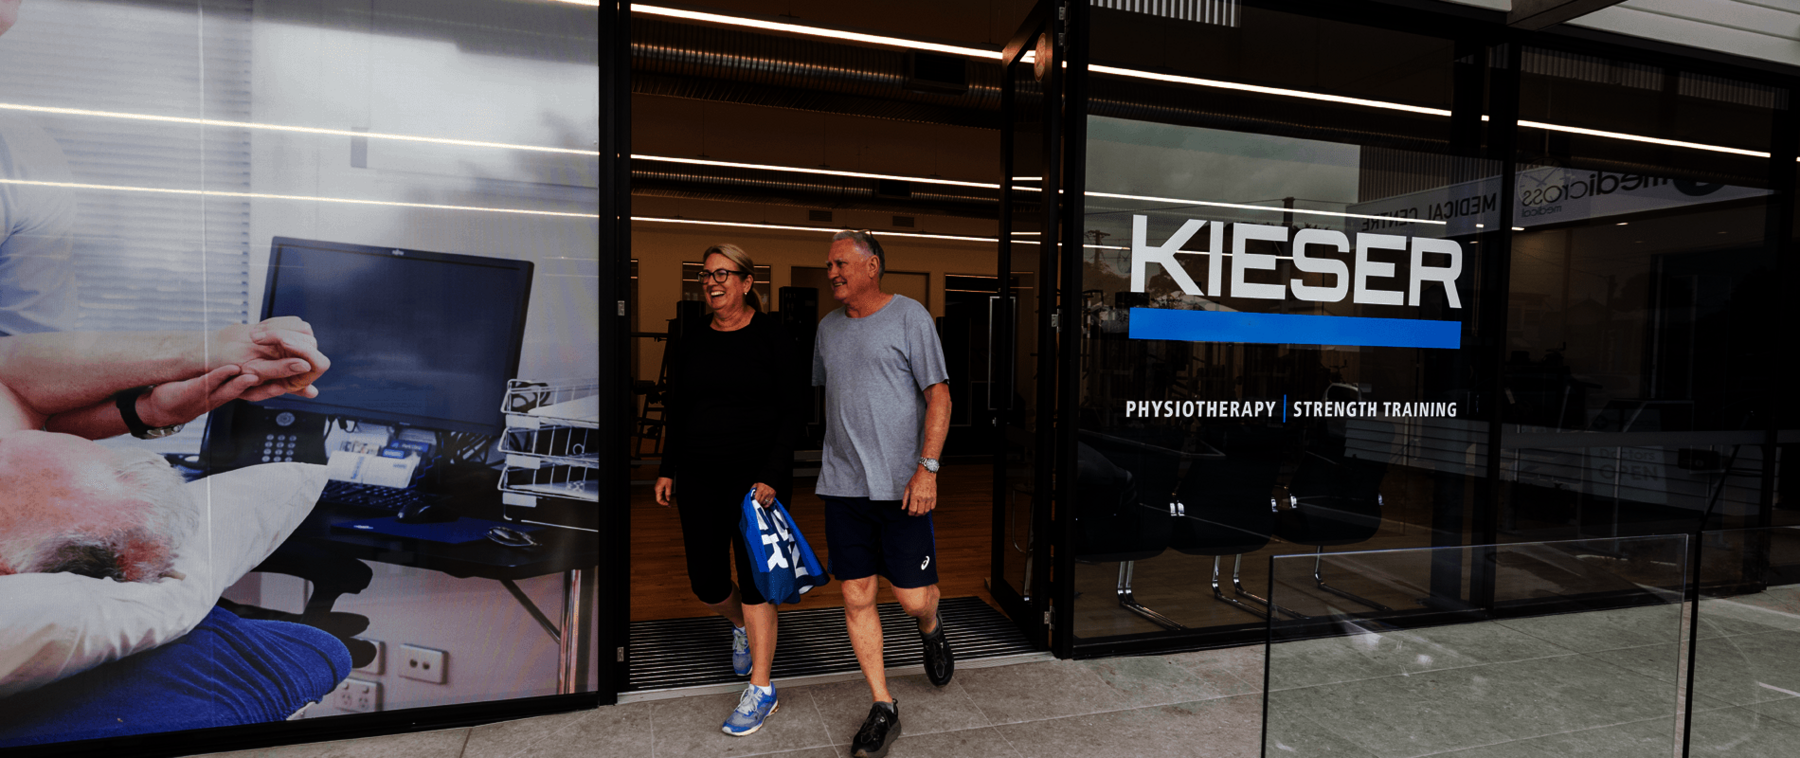 Two smiling people at entrance of a Kieser clinic